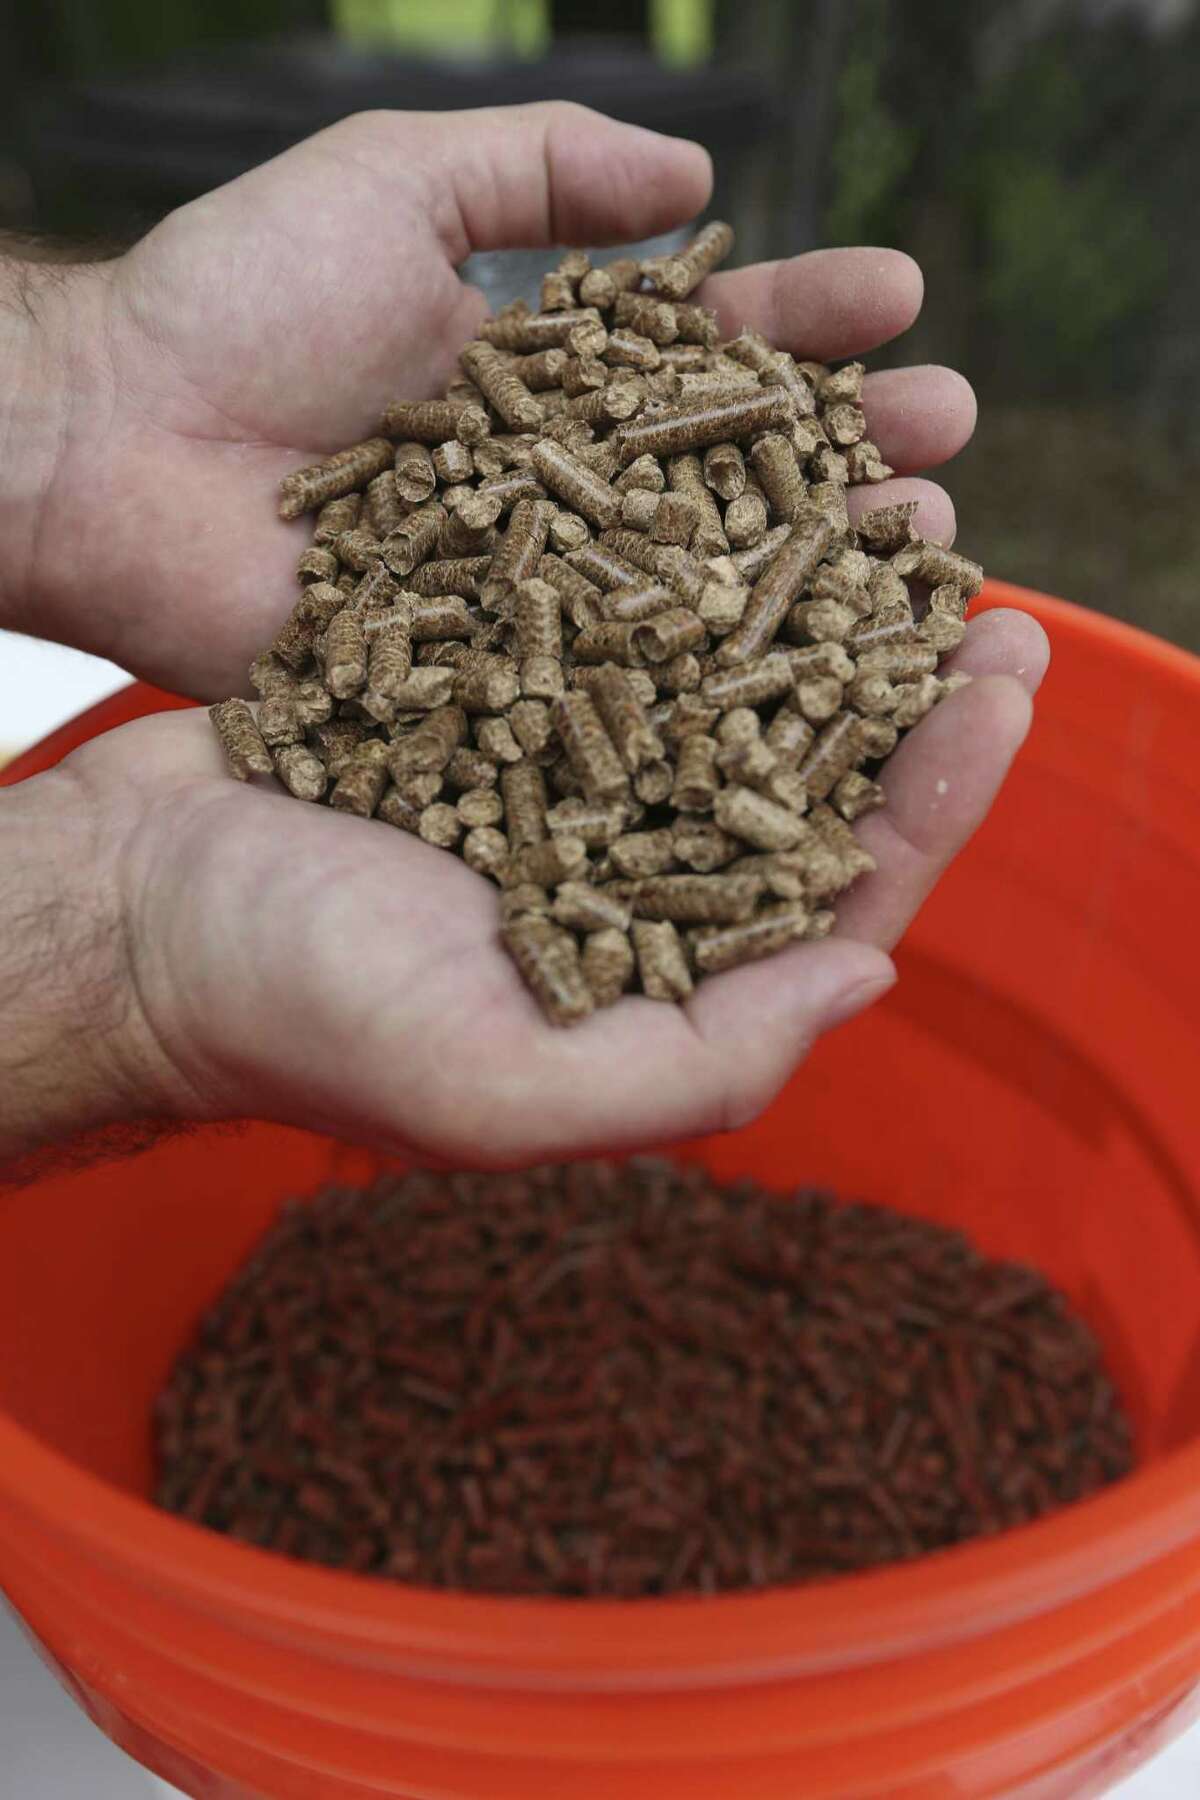 Wooden pellets used in the pellet grills have the same look as rabbit food.